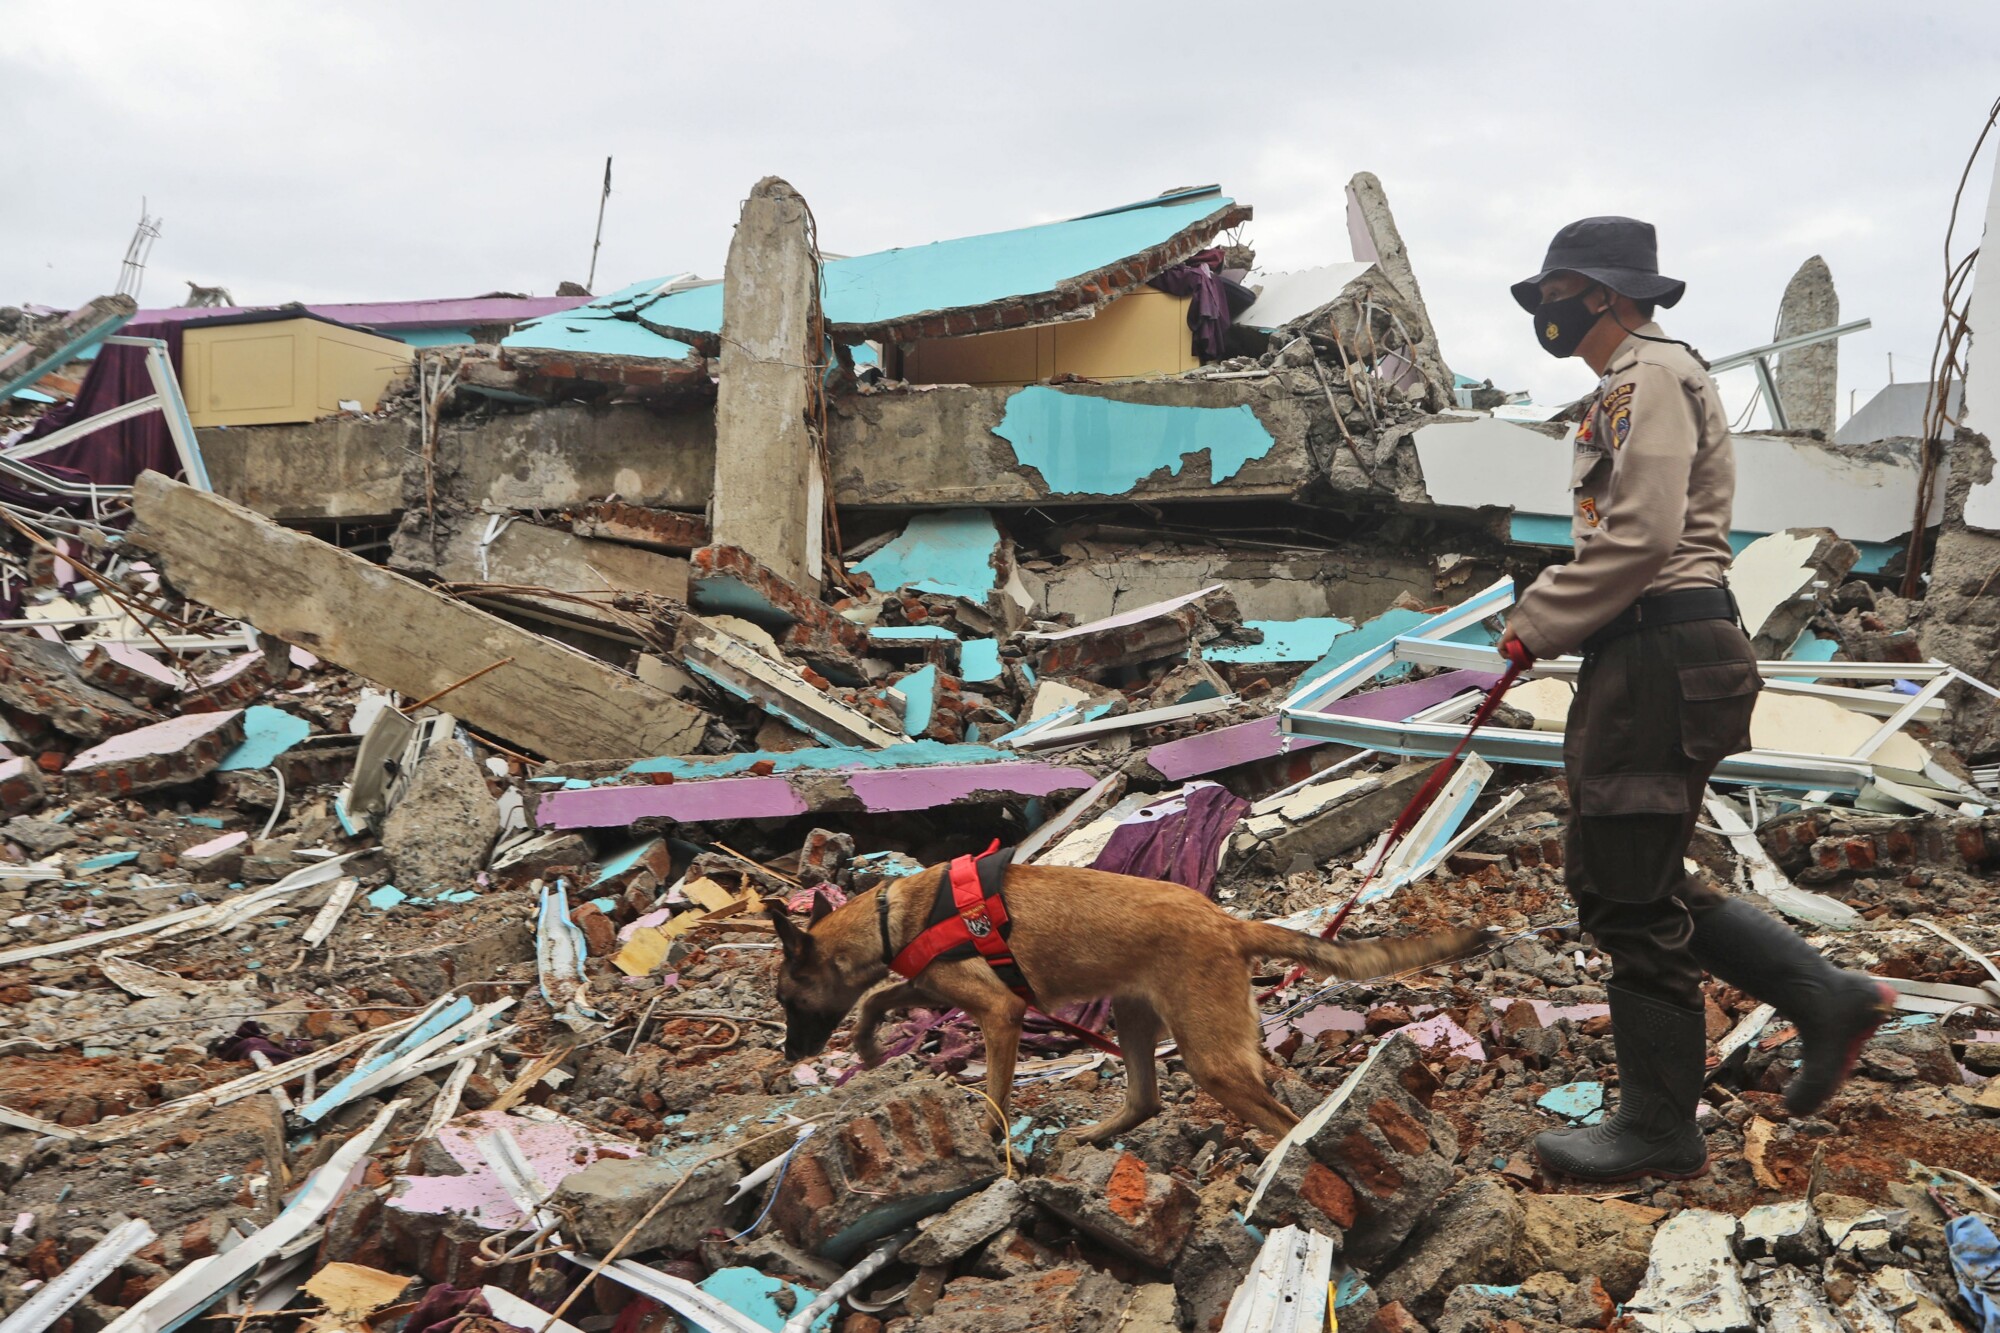 Quake Death Toll at 78 as Indonesia Struggles With String of Disasters